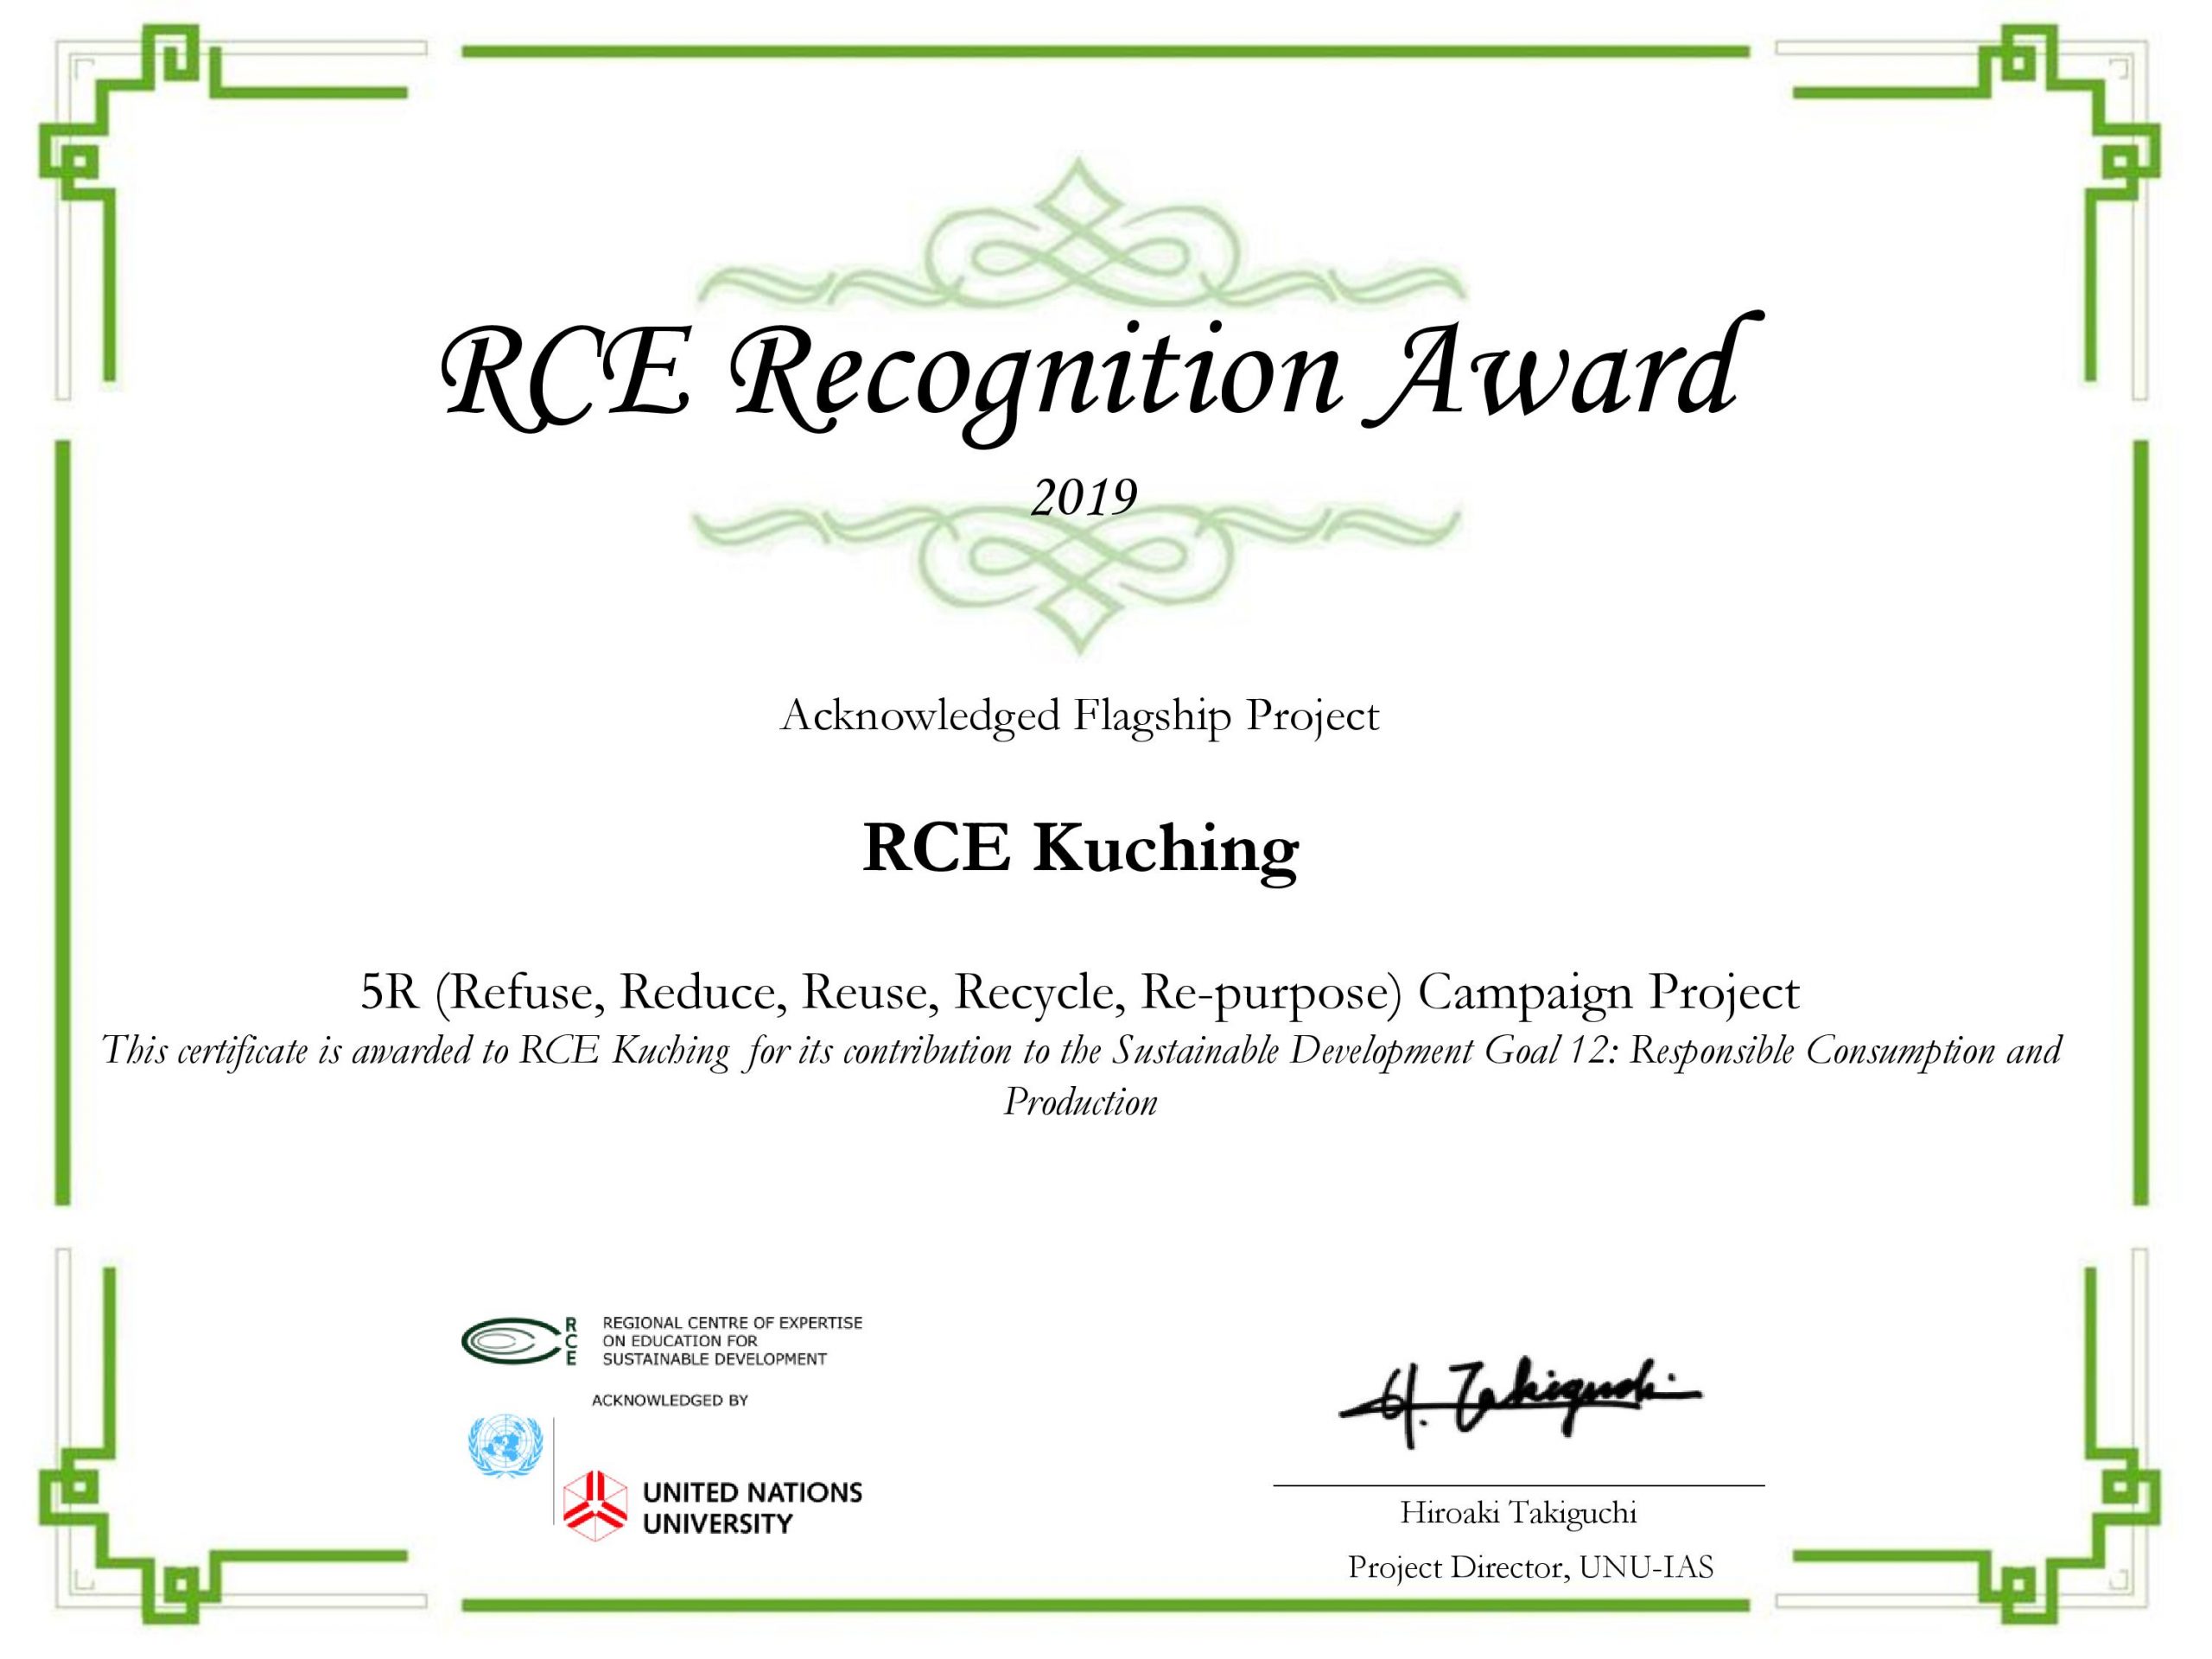 RCE Recognition Award 2019 -Acknowledged Flagship Project - 5R Campaign